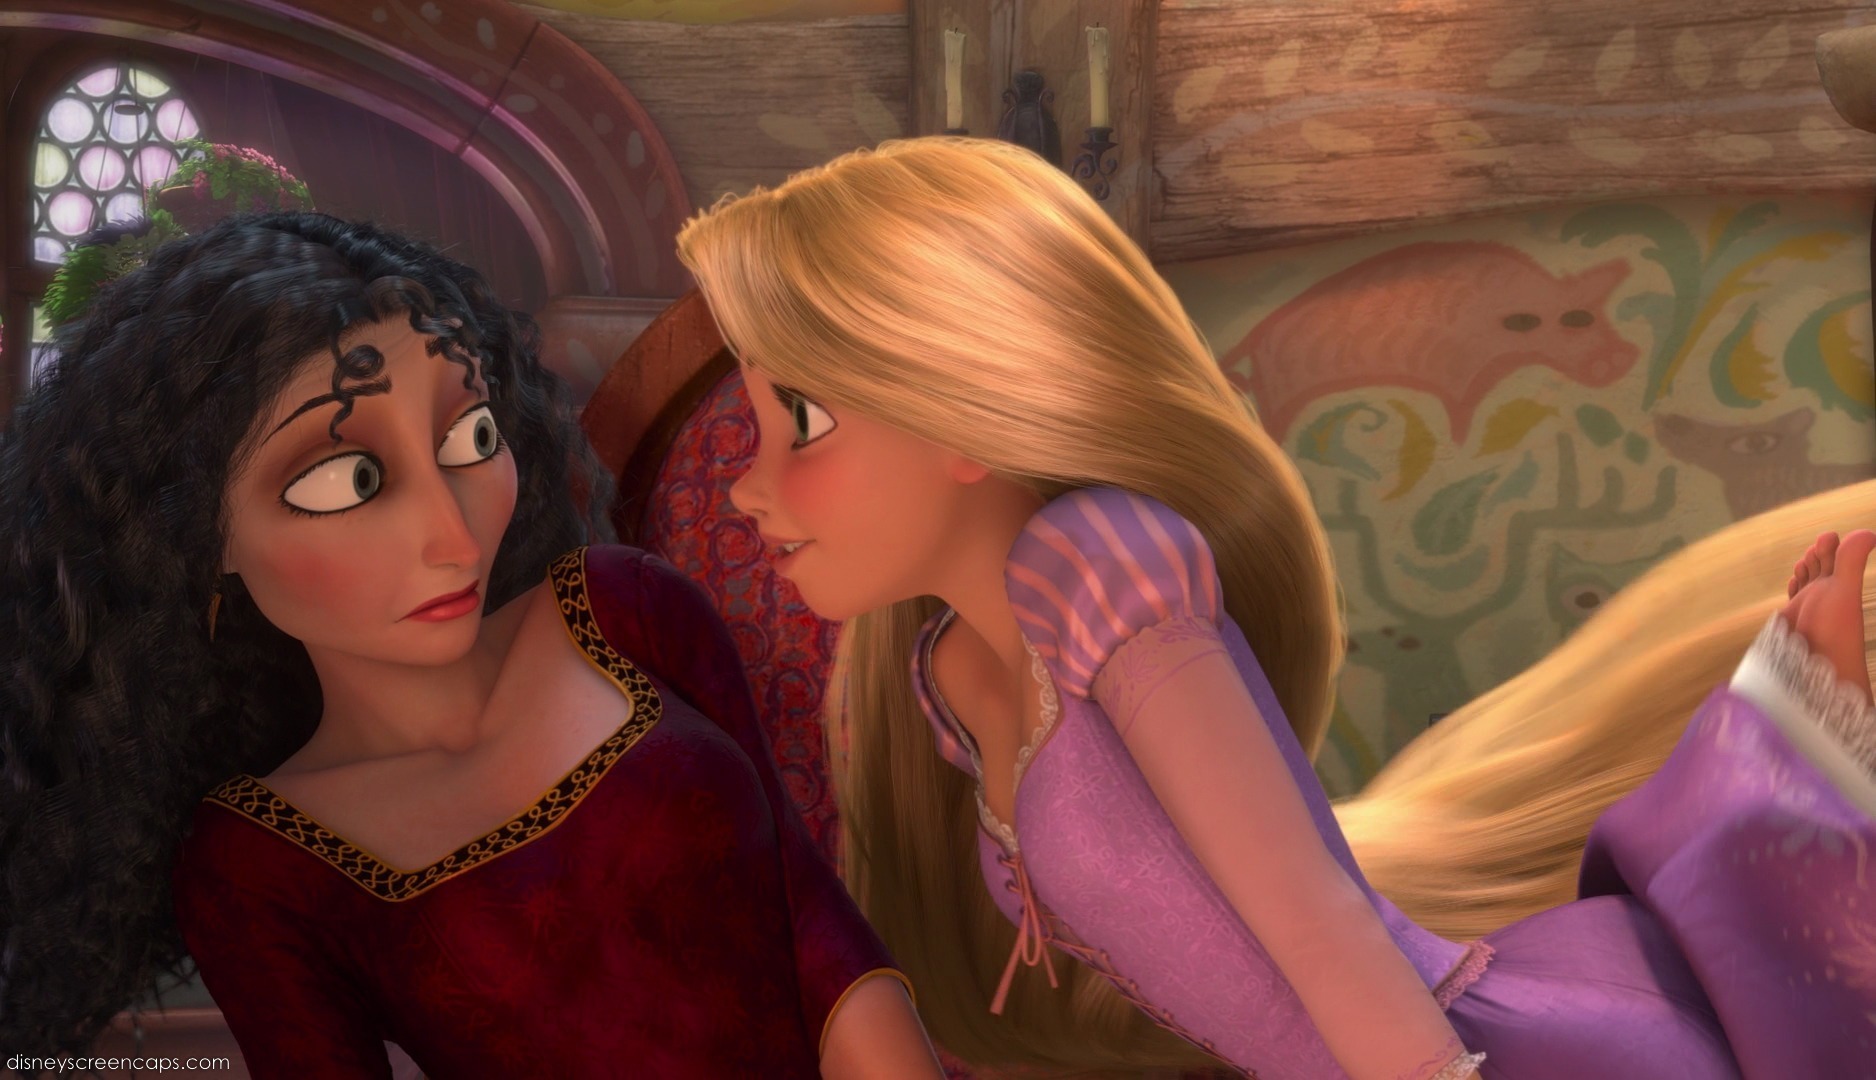 Pretty Rapunzel And Mother Gothel Disney Females Image 21561098.